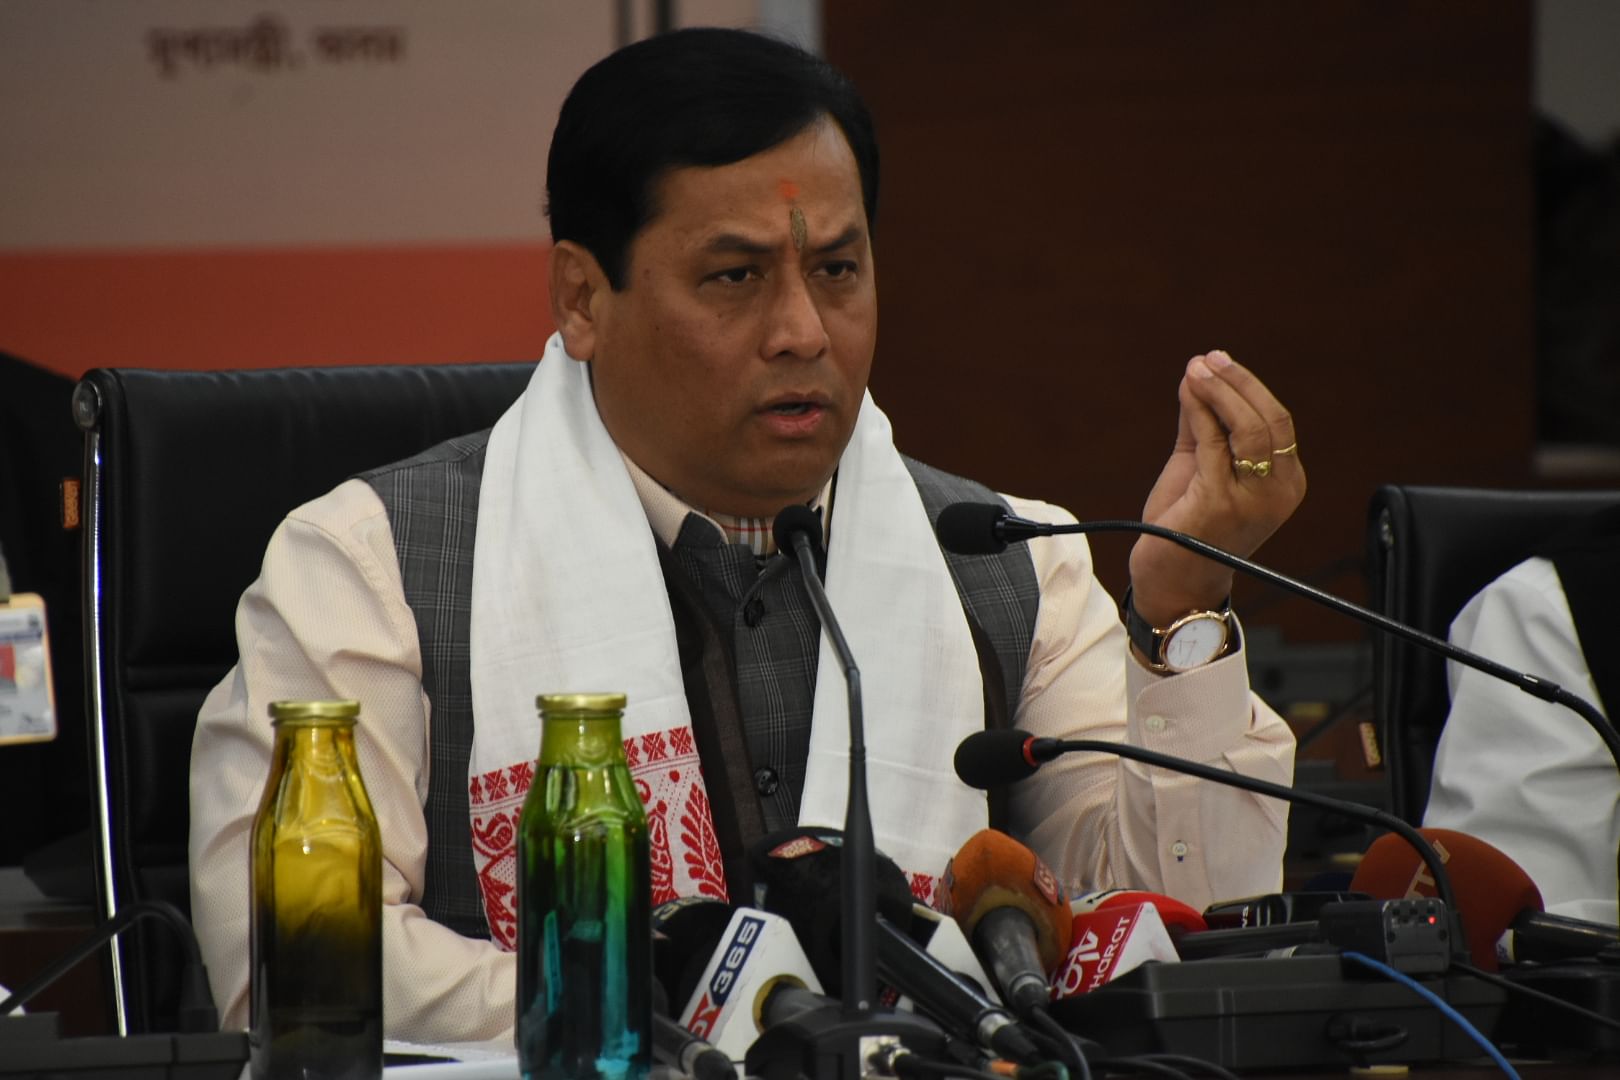 Assam CM Sarbananda Sonowal interacting with mediapersons in Guwahati on Wednesday. Photo credit: Assam govt